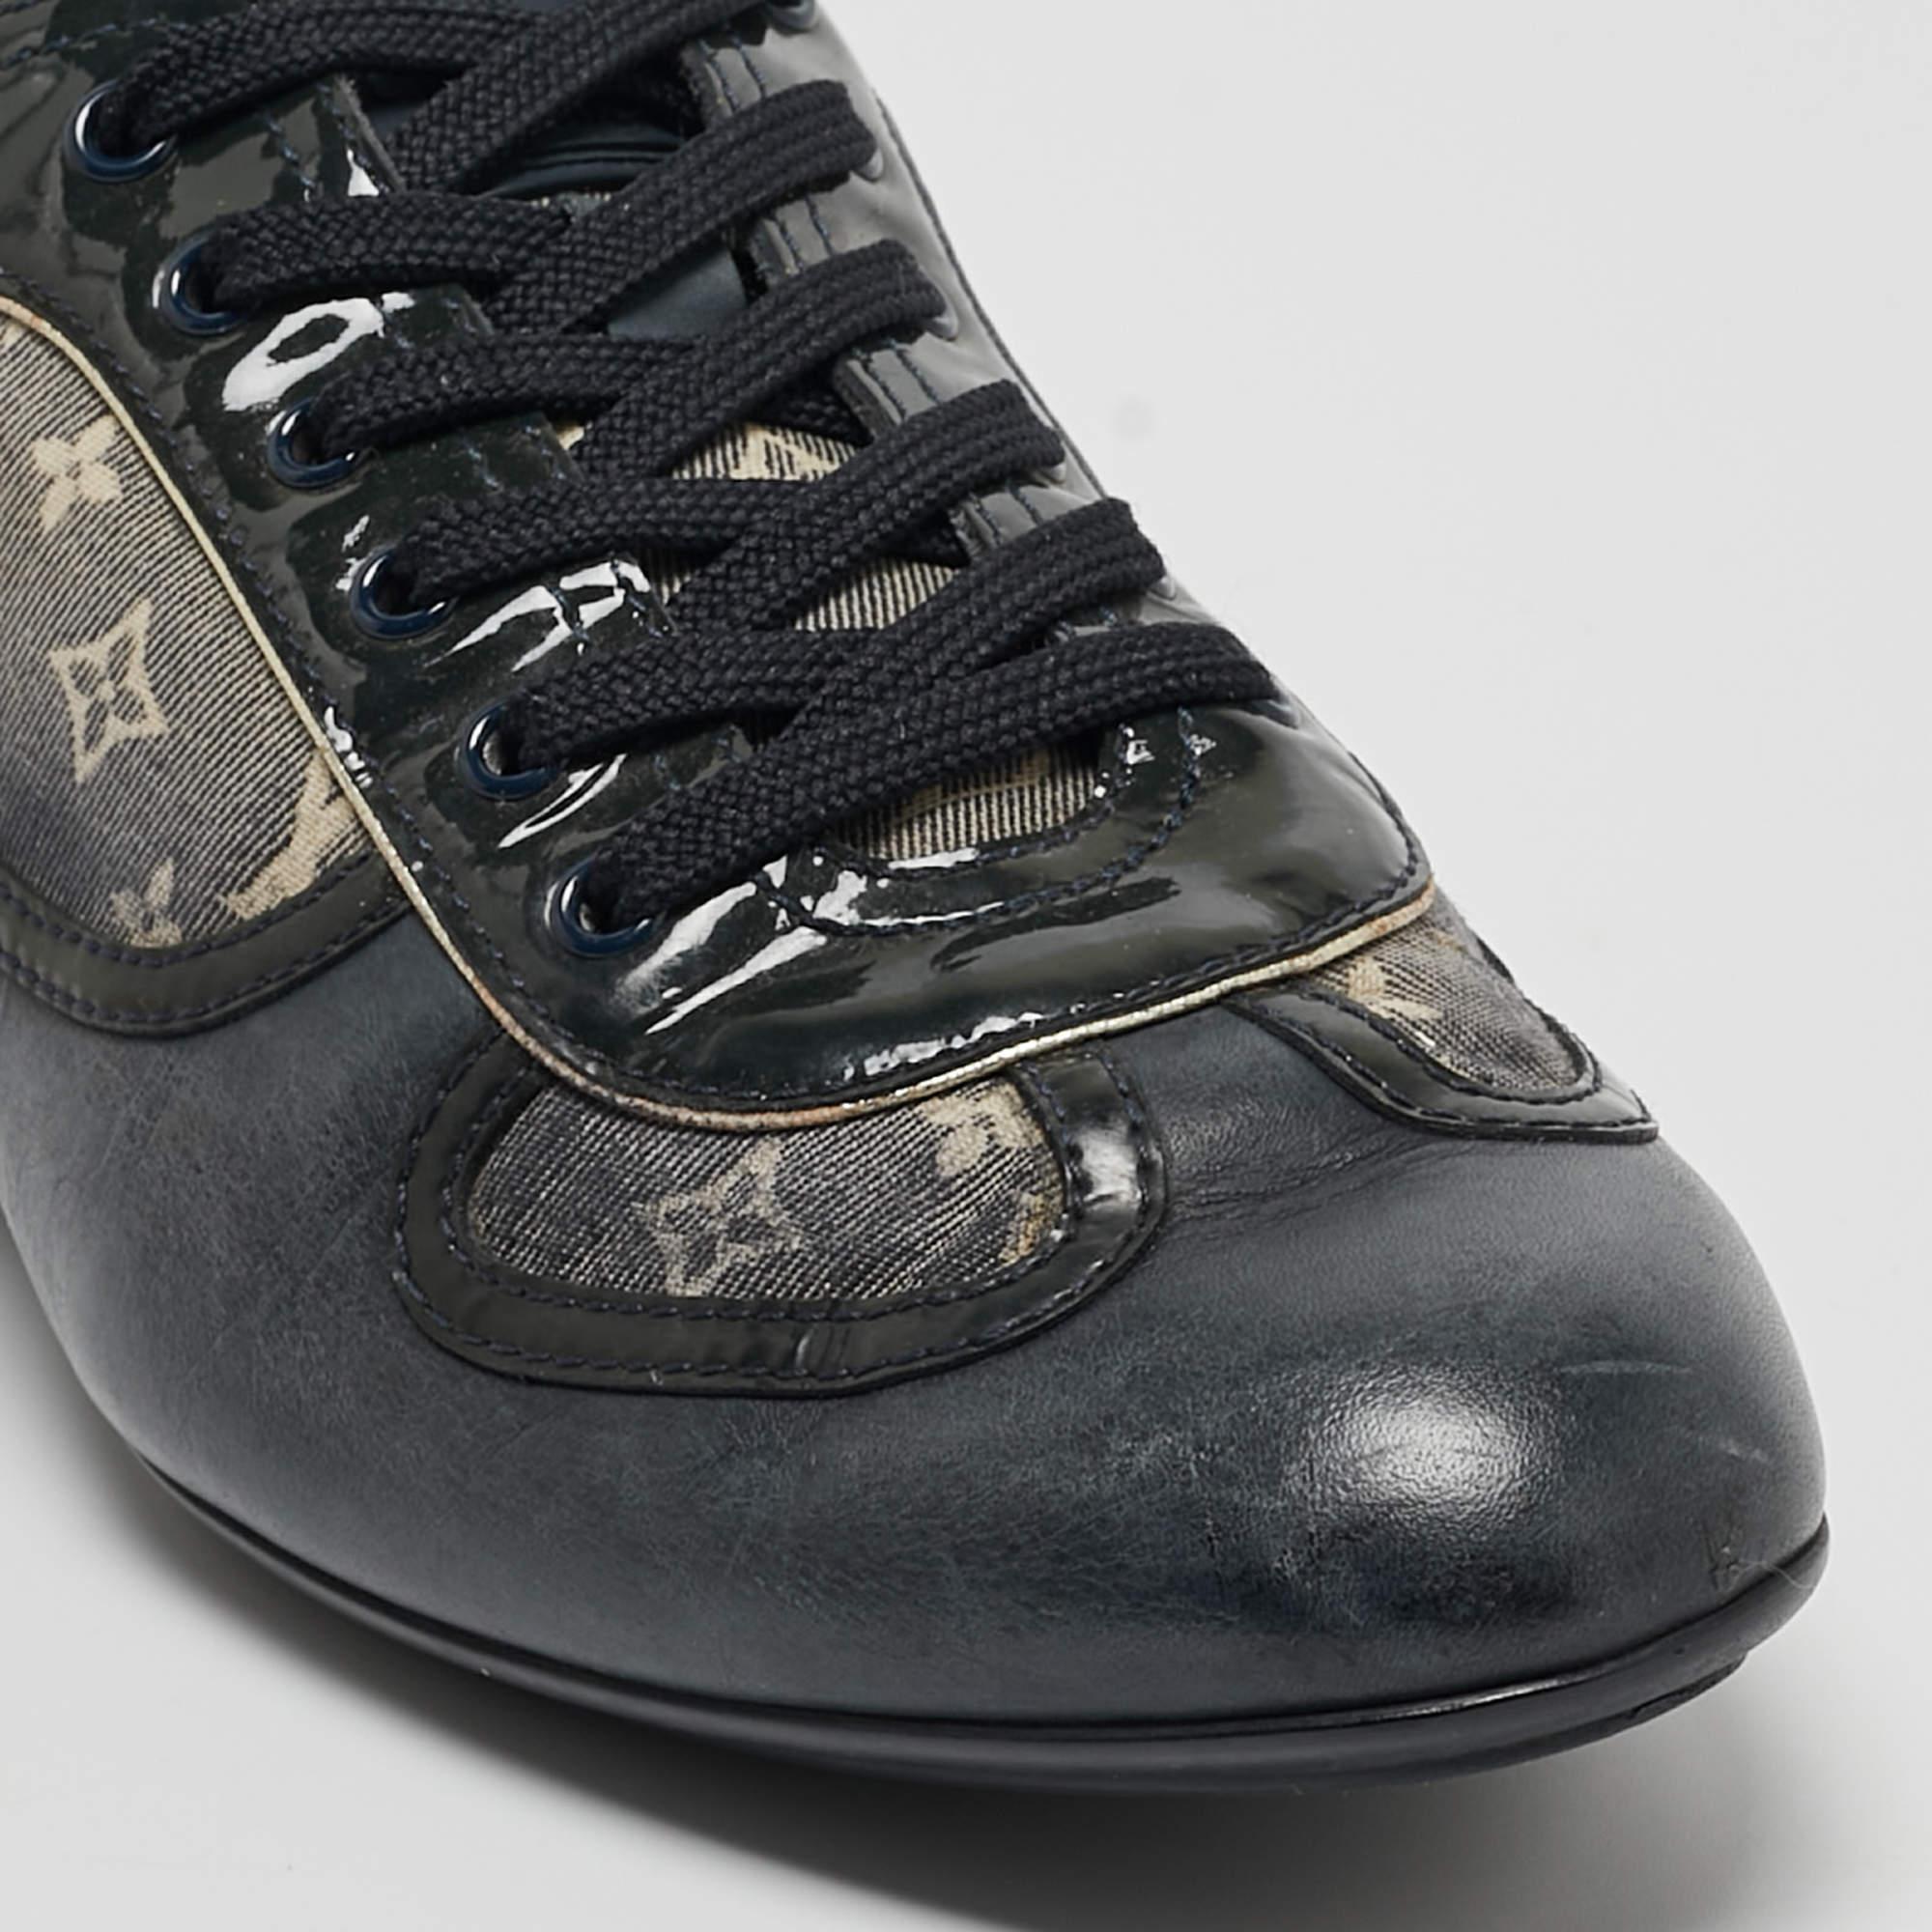 Louis Vuitton Tricolor Leather and Monogram Canvas Low Top Sneakers Size 37 For Sale 4